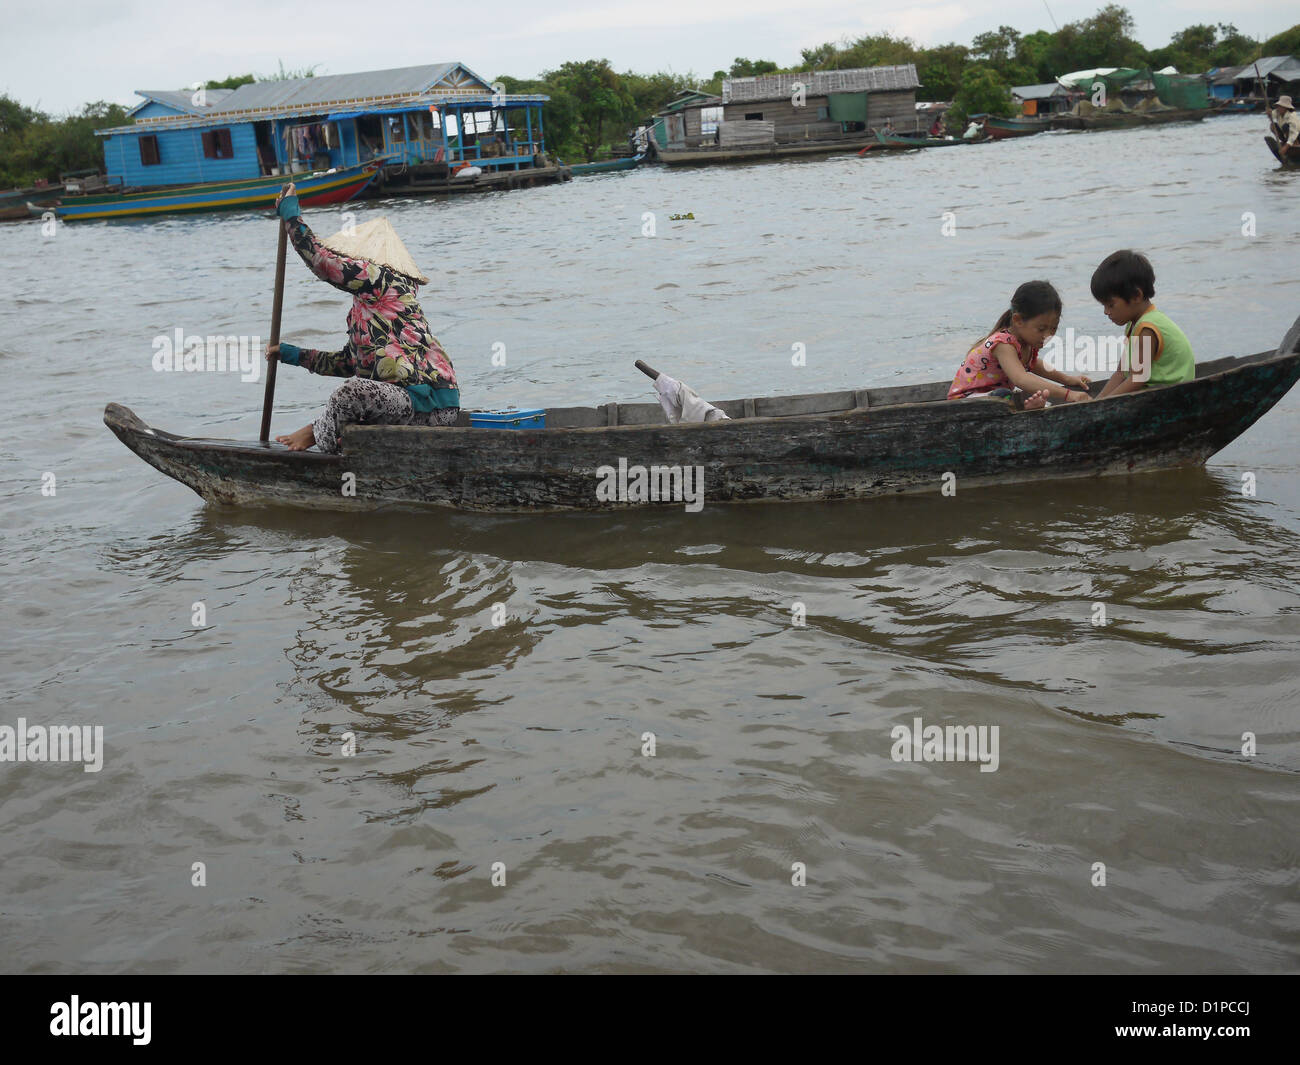 Asian woman steer boat young boy girl playing Stock Photo